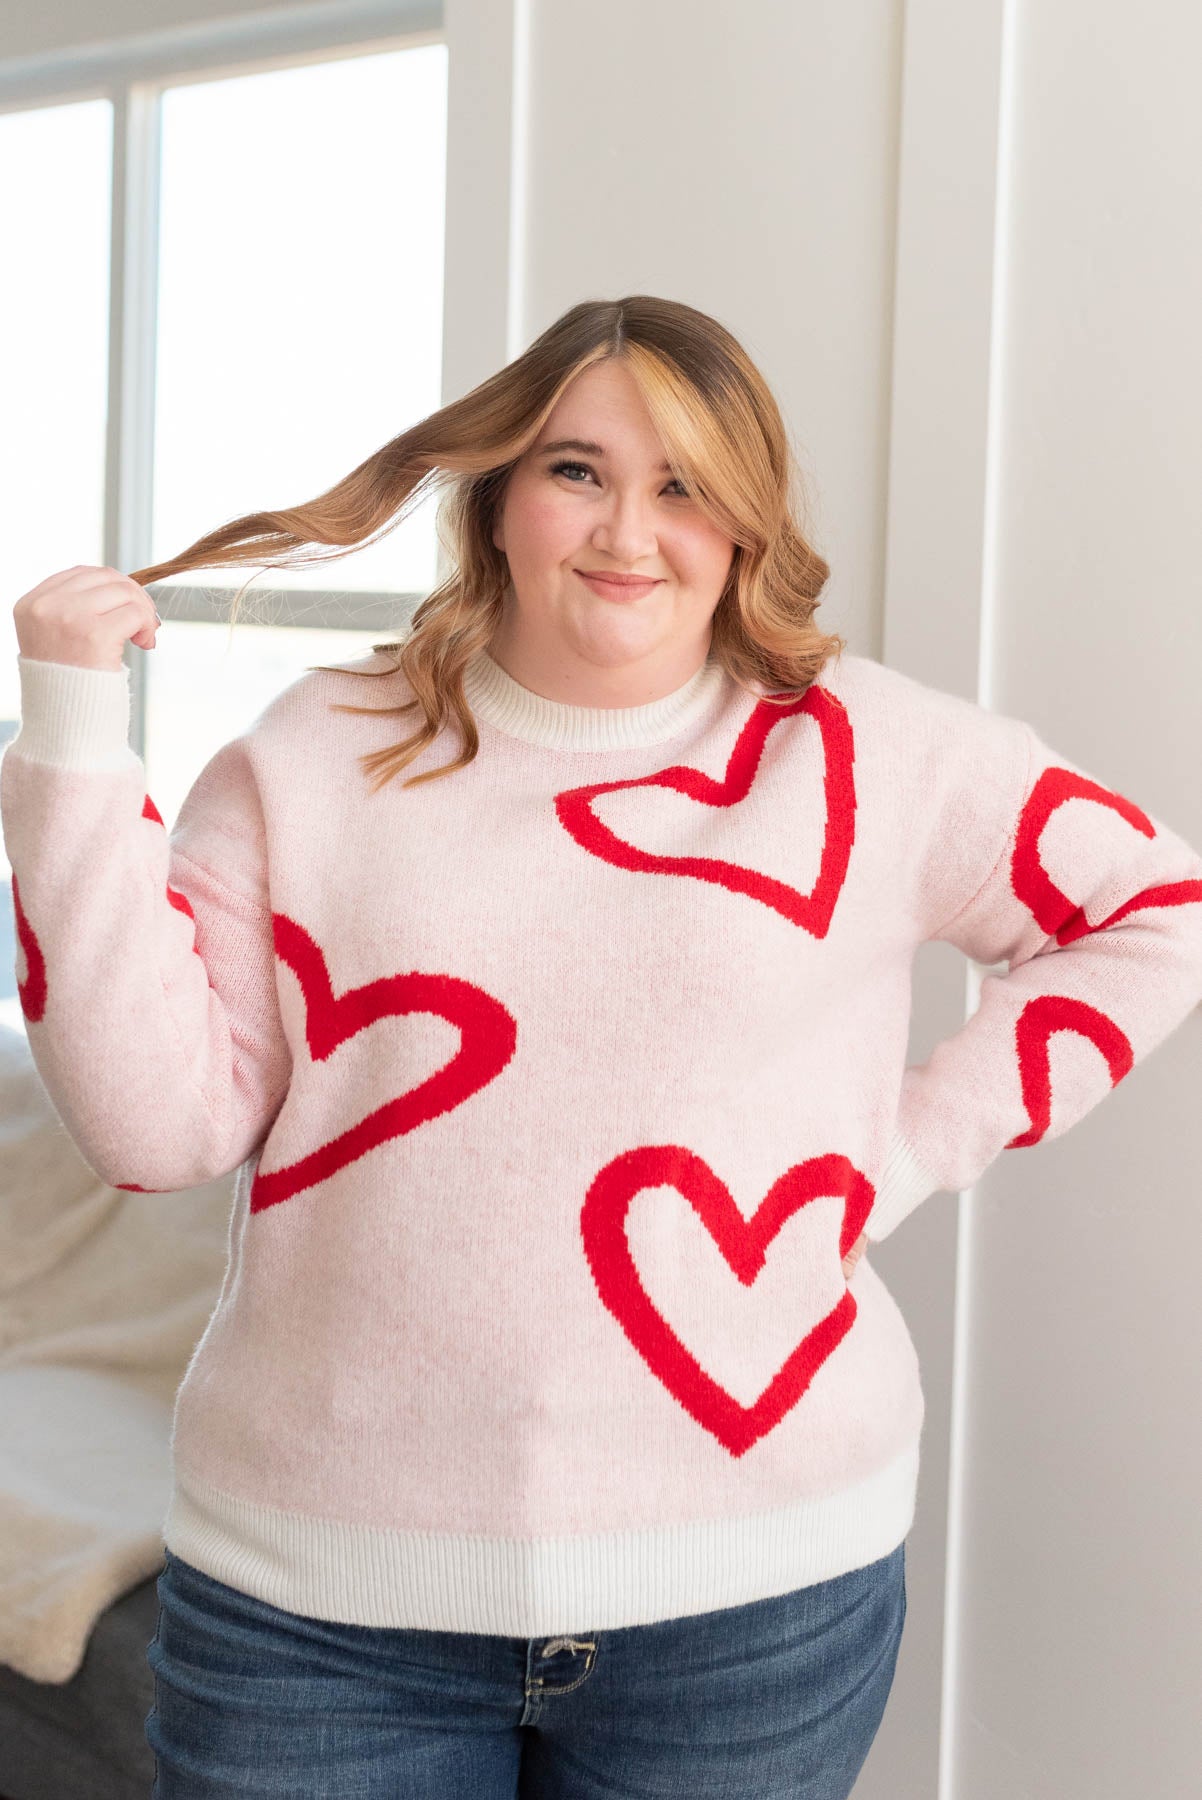 Long sleeve plus size red heart sweater